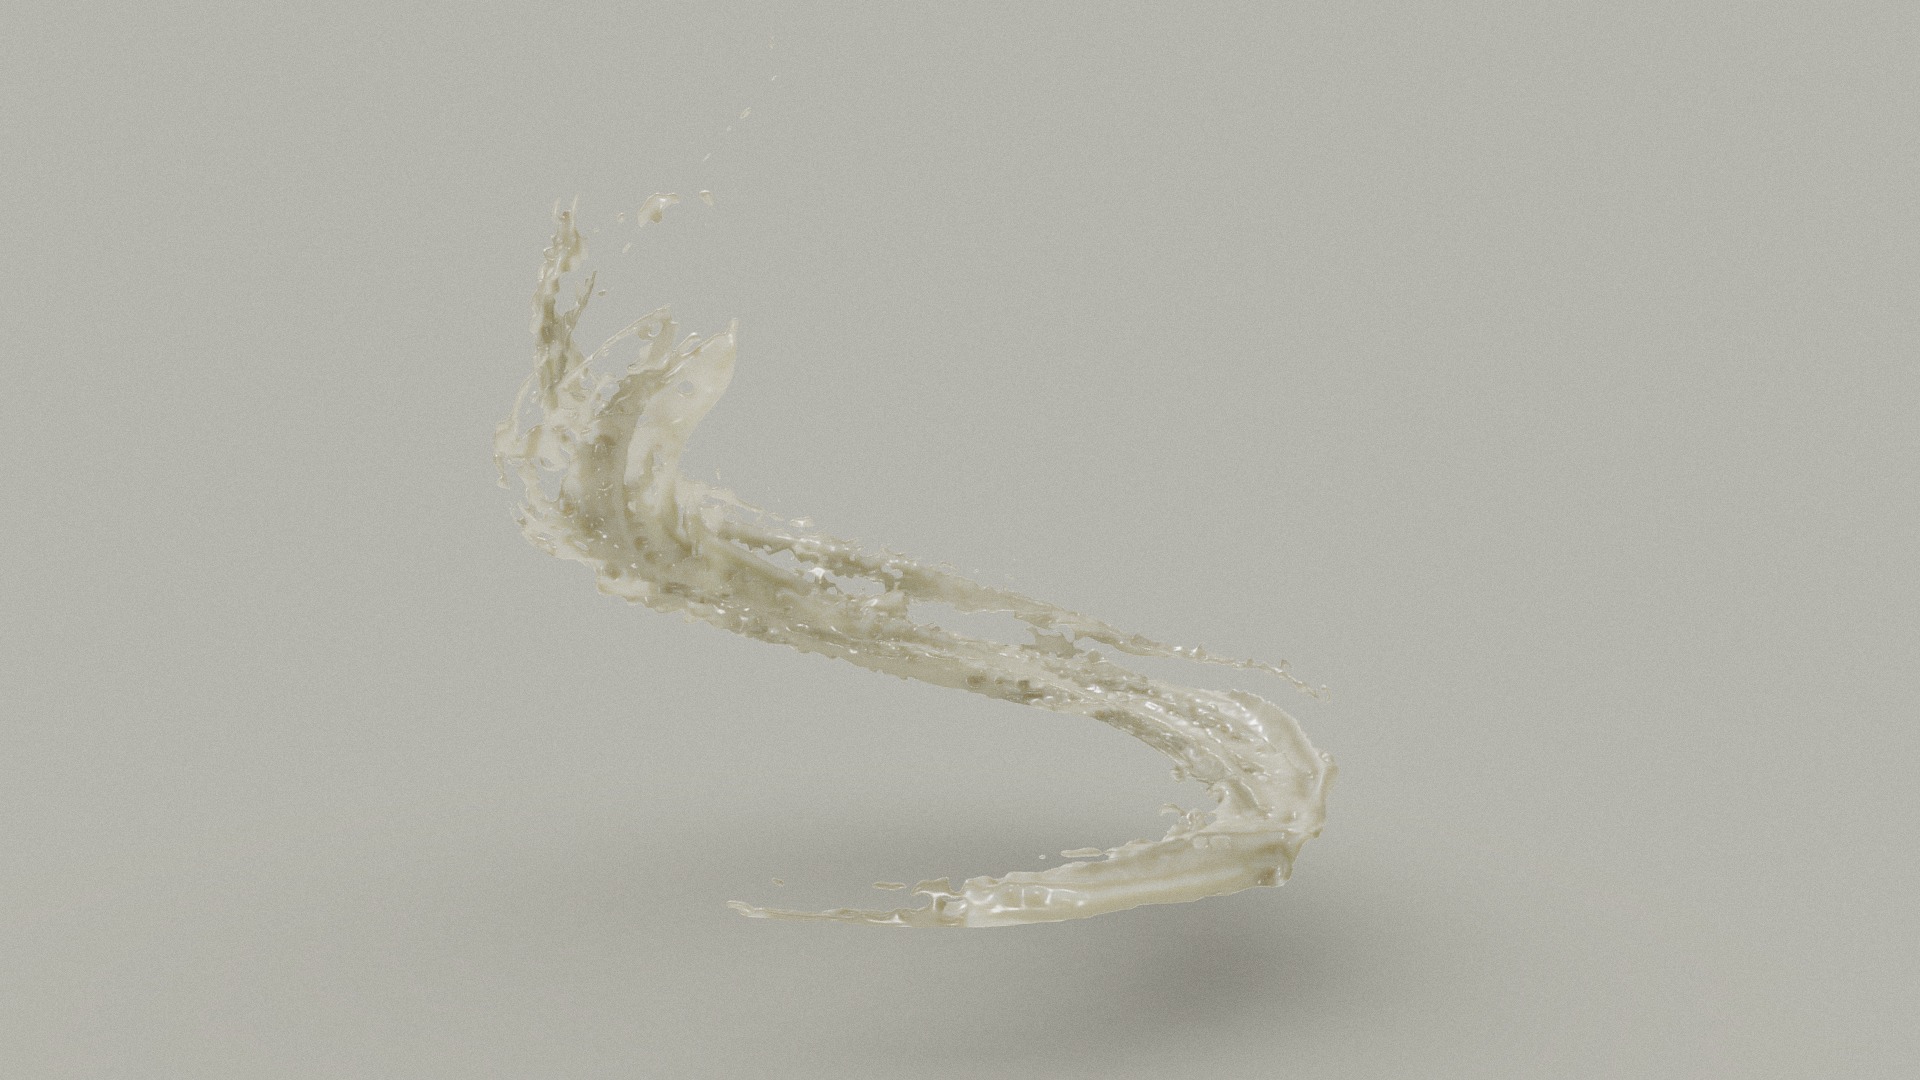 3D model Liquid Splash 7 - This is a 3D model of the Liquid Splash 7. The 3D model is about a white feather on a white surface.